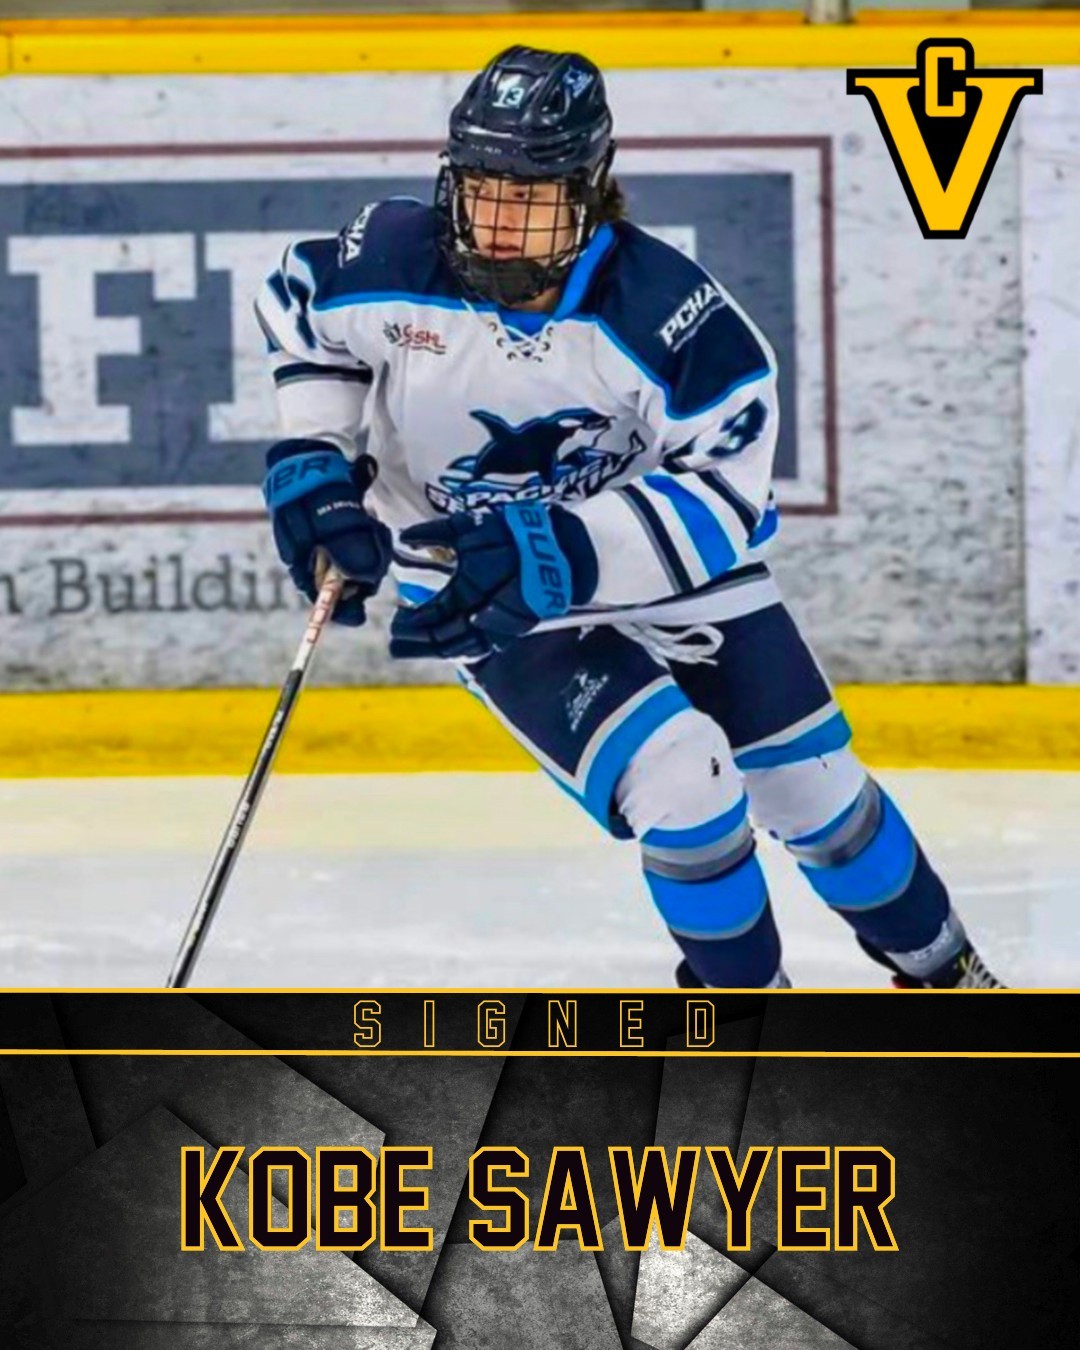 SIGNED: The Cougars have signed ‘06 Forward Kobe Sawyer out of PCHA U16! Welcome to the club!